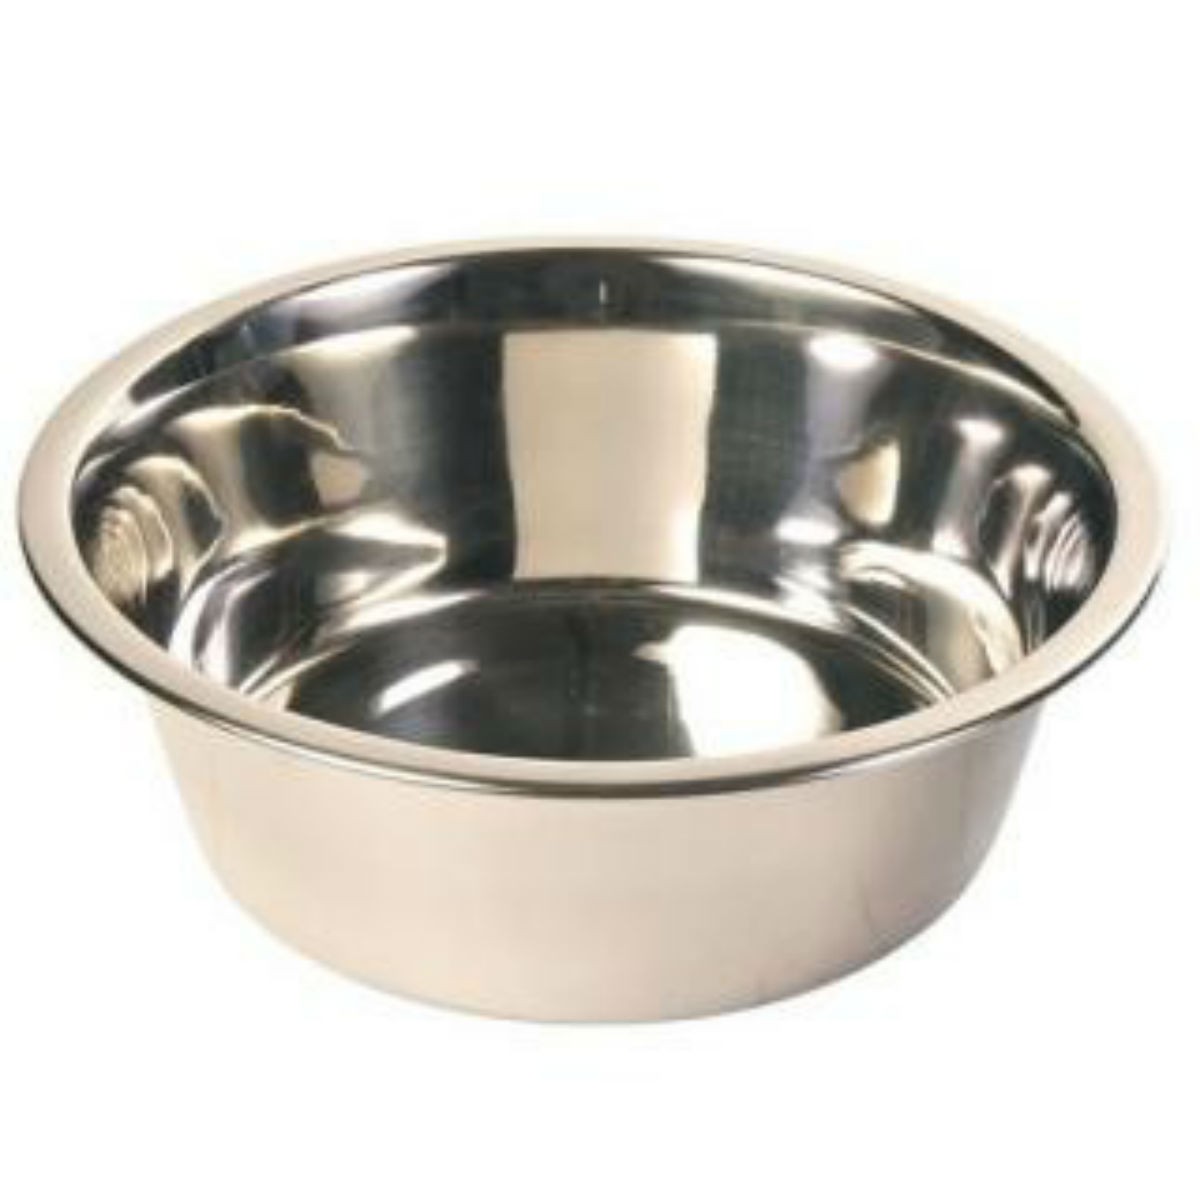 Stainless bowl 4l